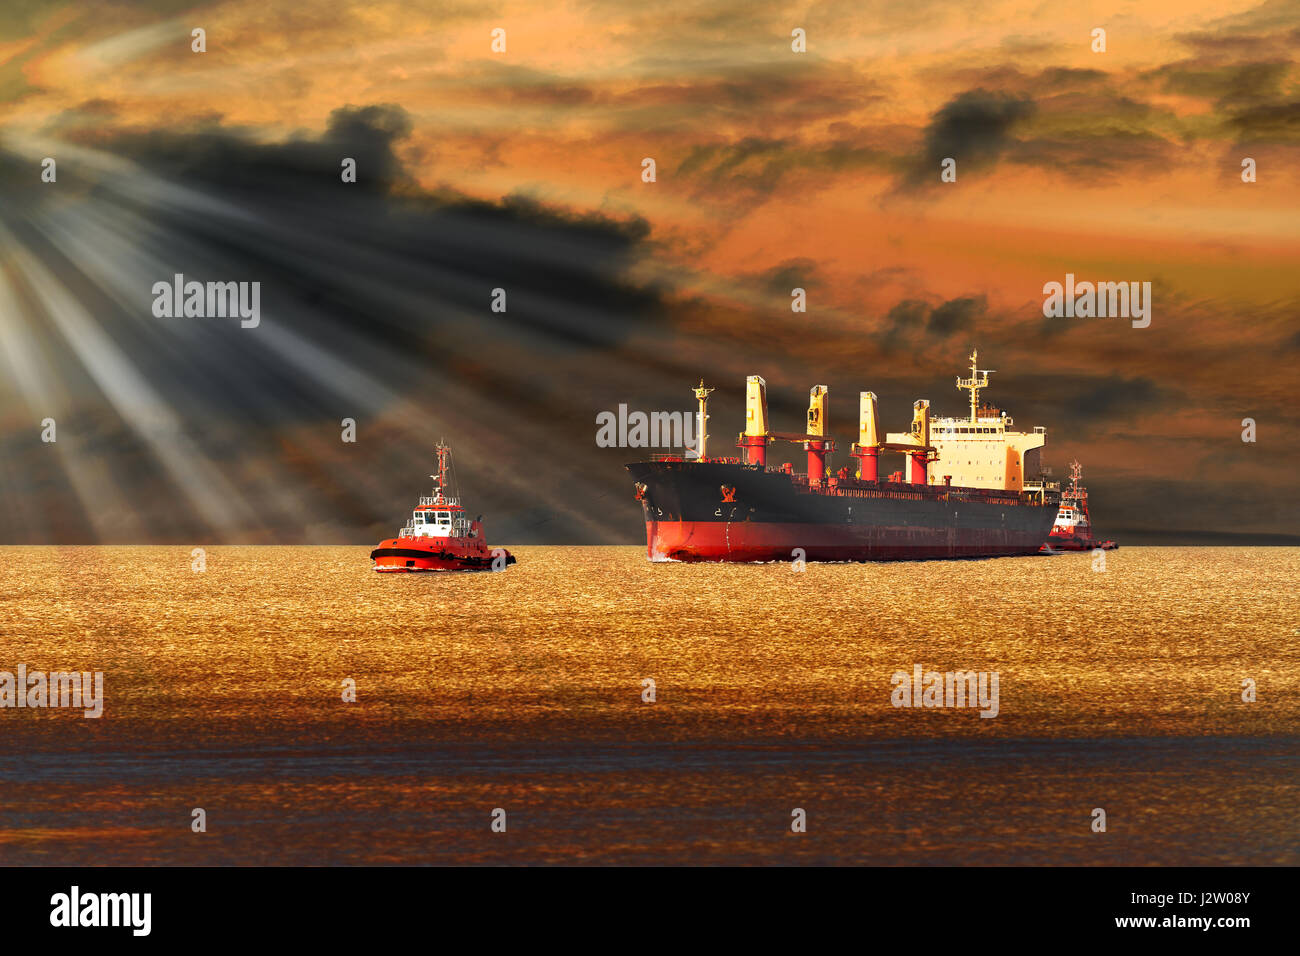 Tugboats towing a large cargo ship on sea. Stock Photo